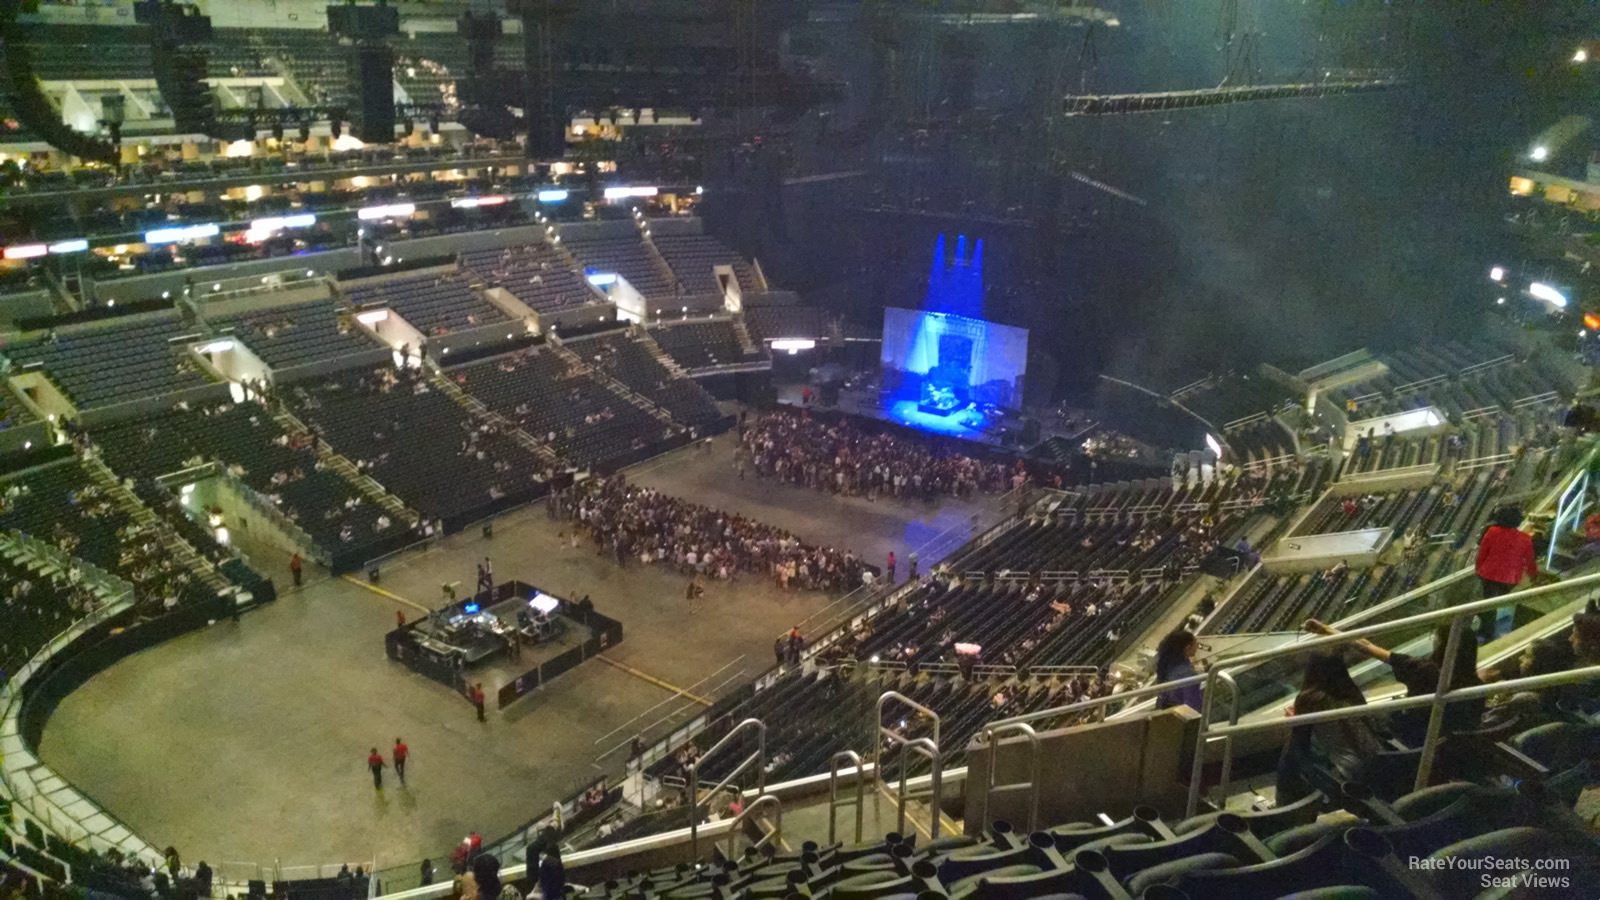 section 305, row 11 seat view  for concert - crypto.com arena